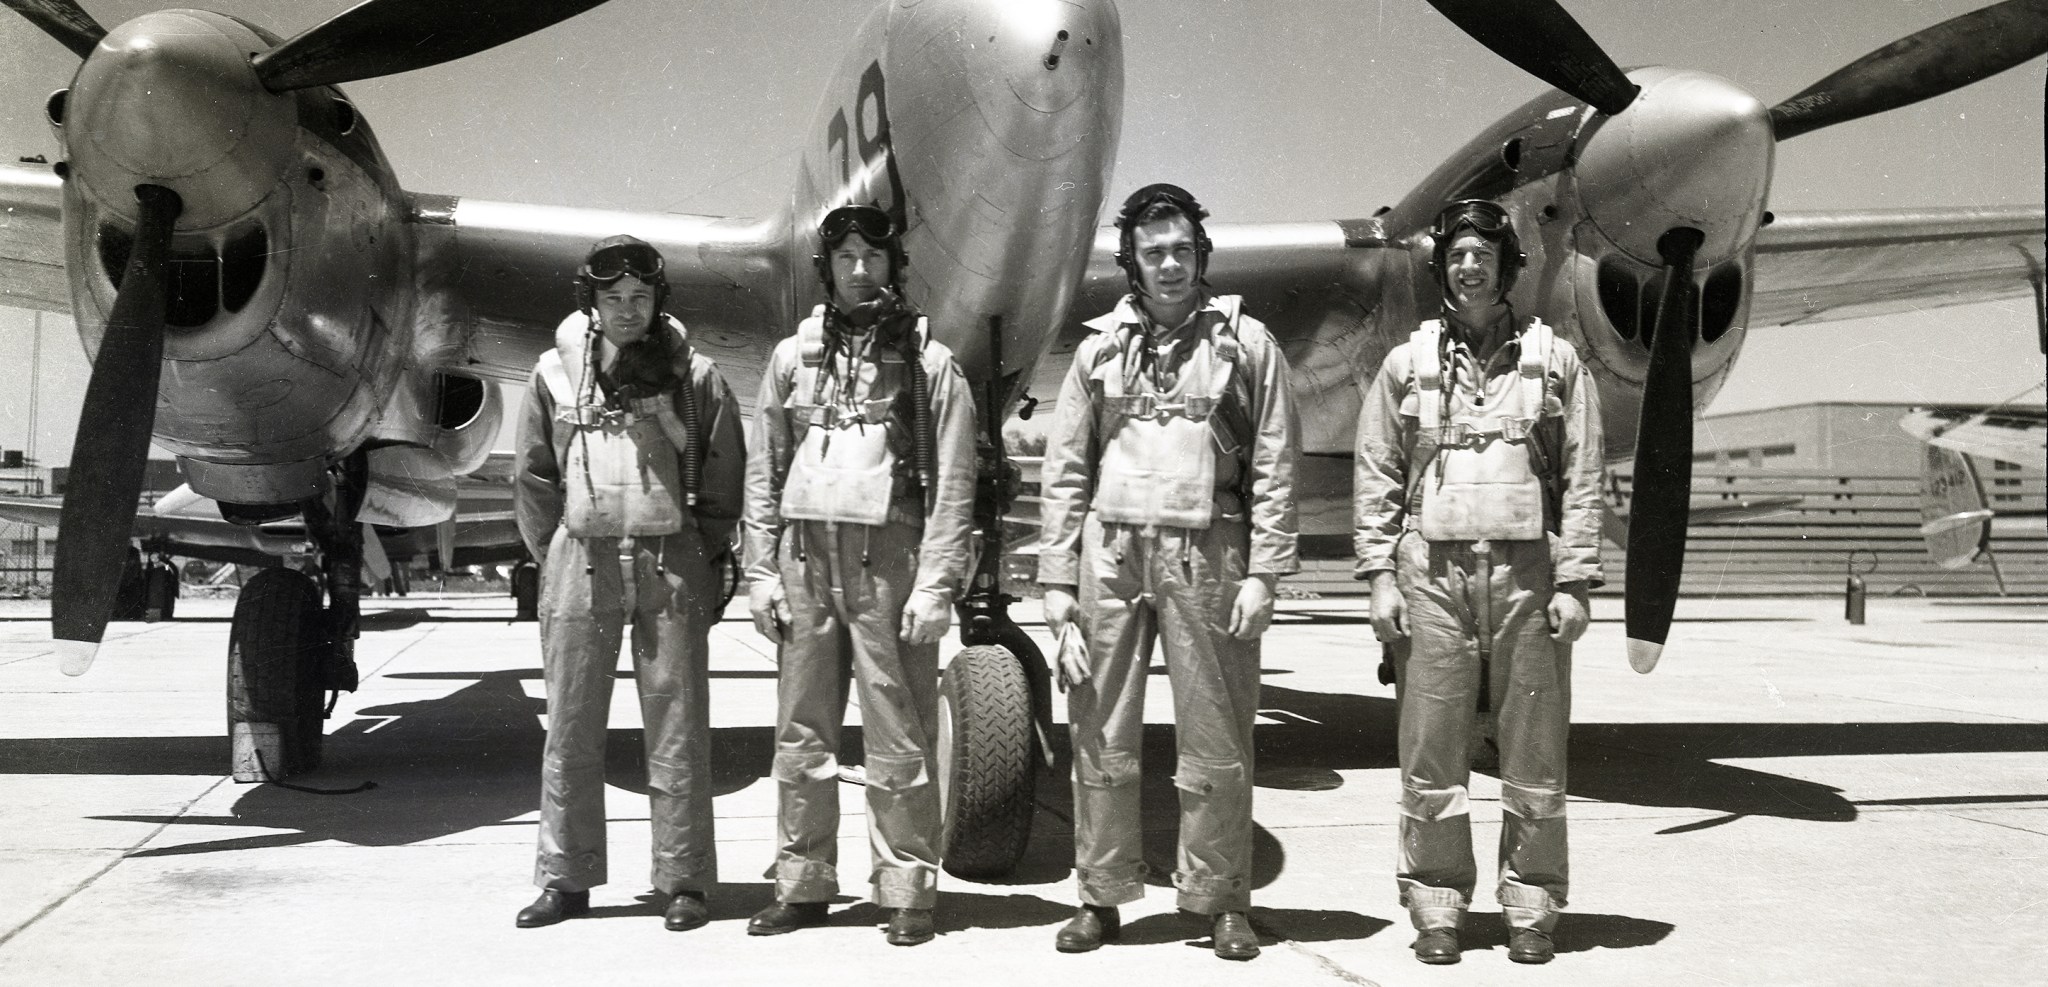 Four pilots standing in front of aircraft.